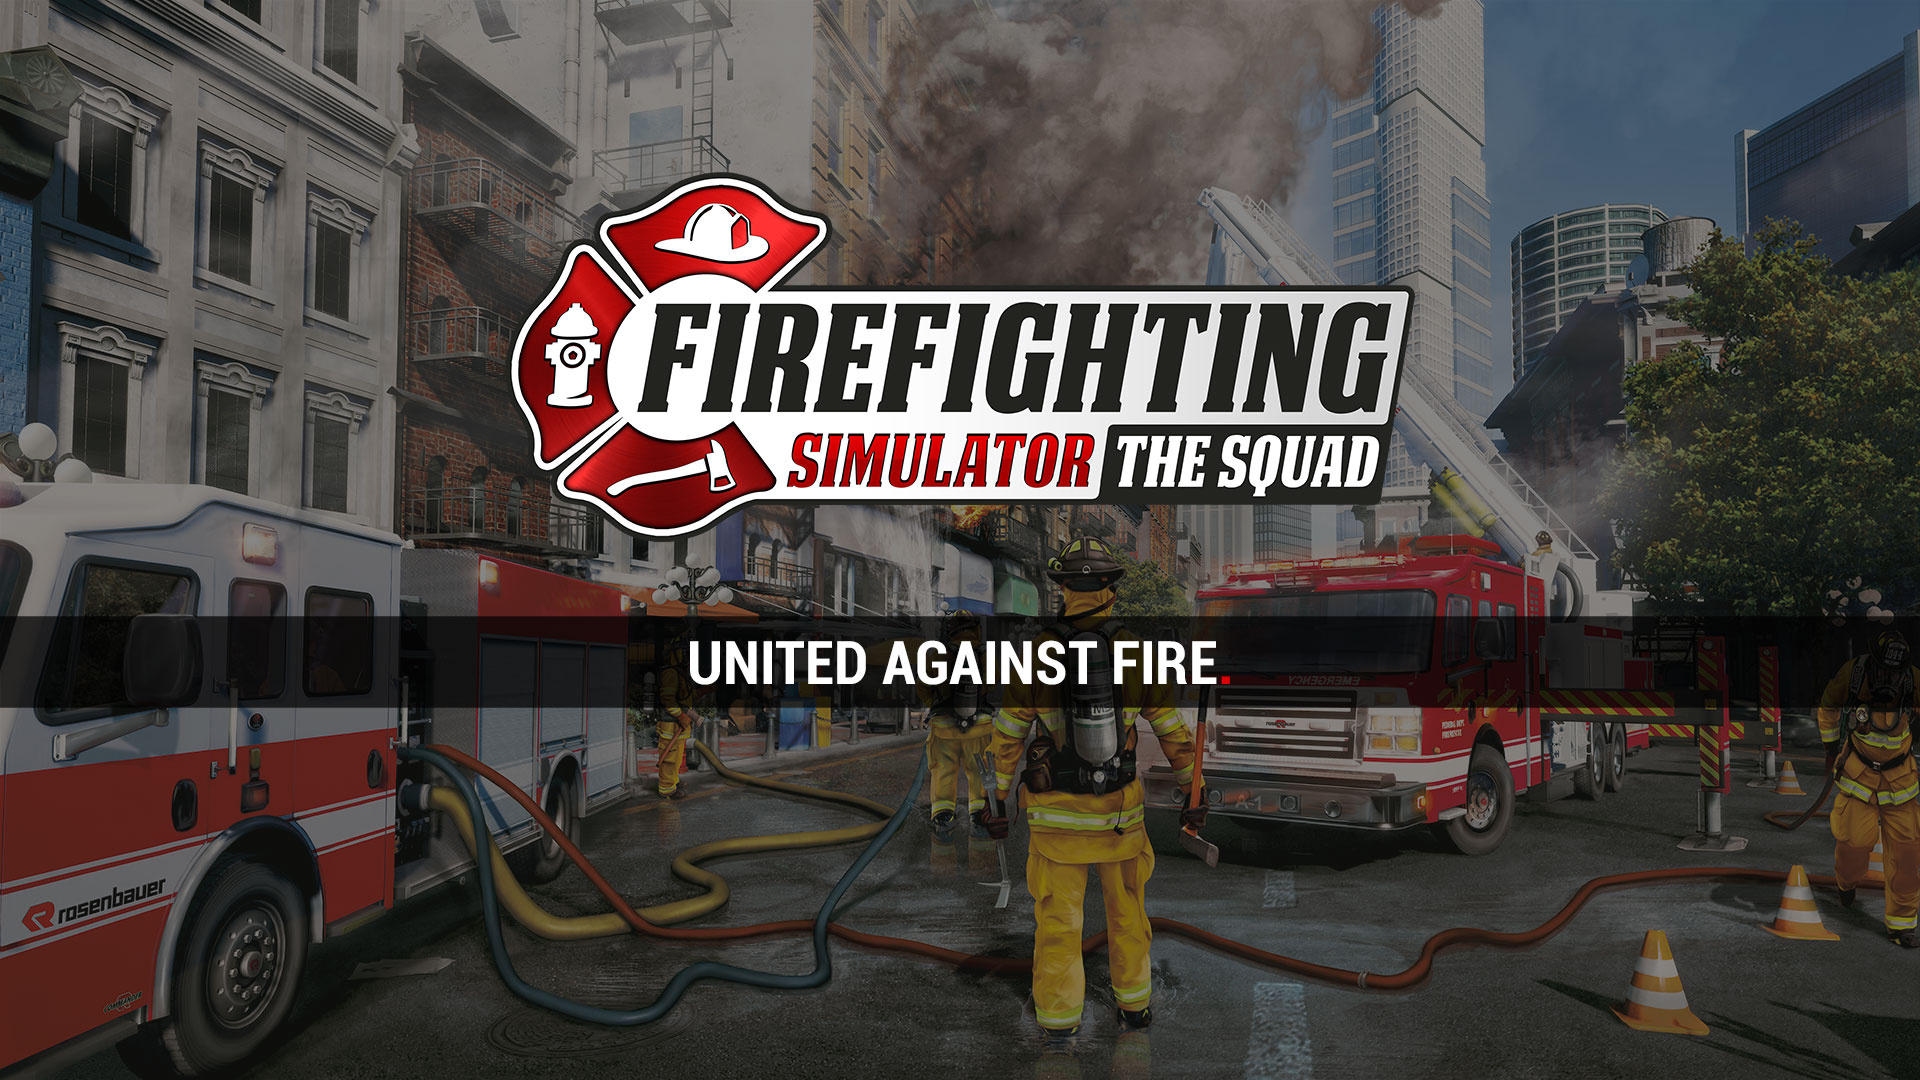 Firefighting Simulator The Squad United Against Fire - firefighter simulator roblox twitter codes